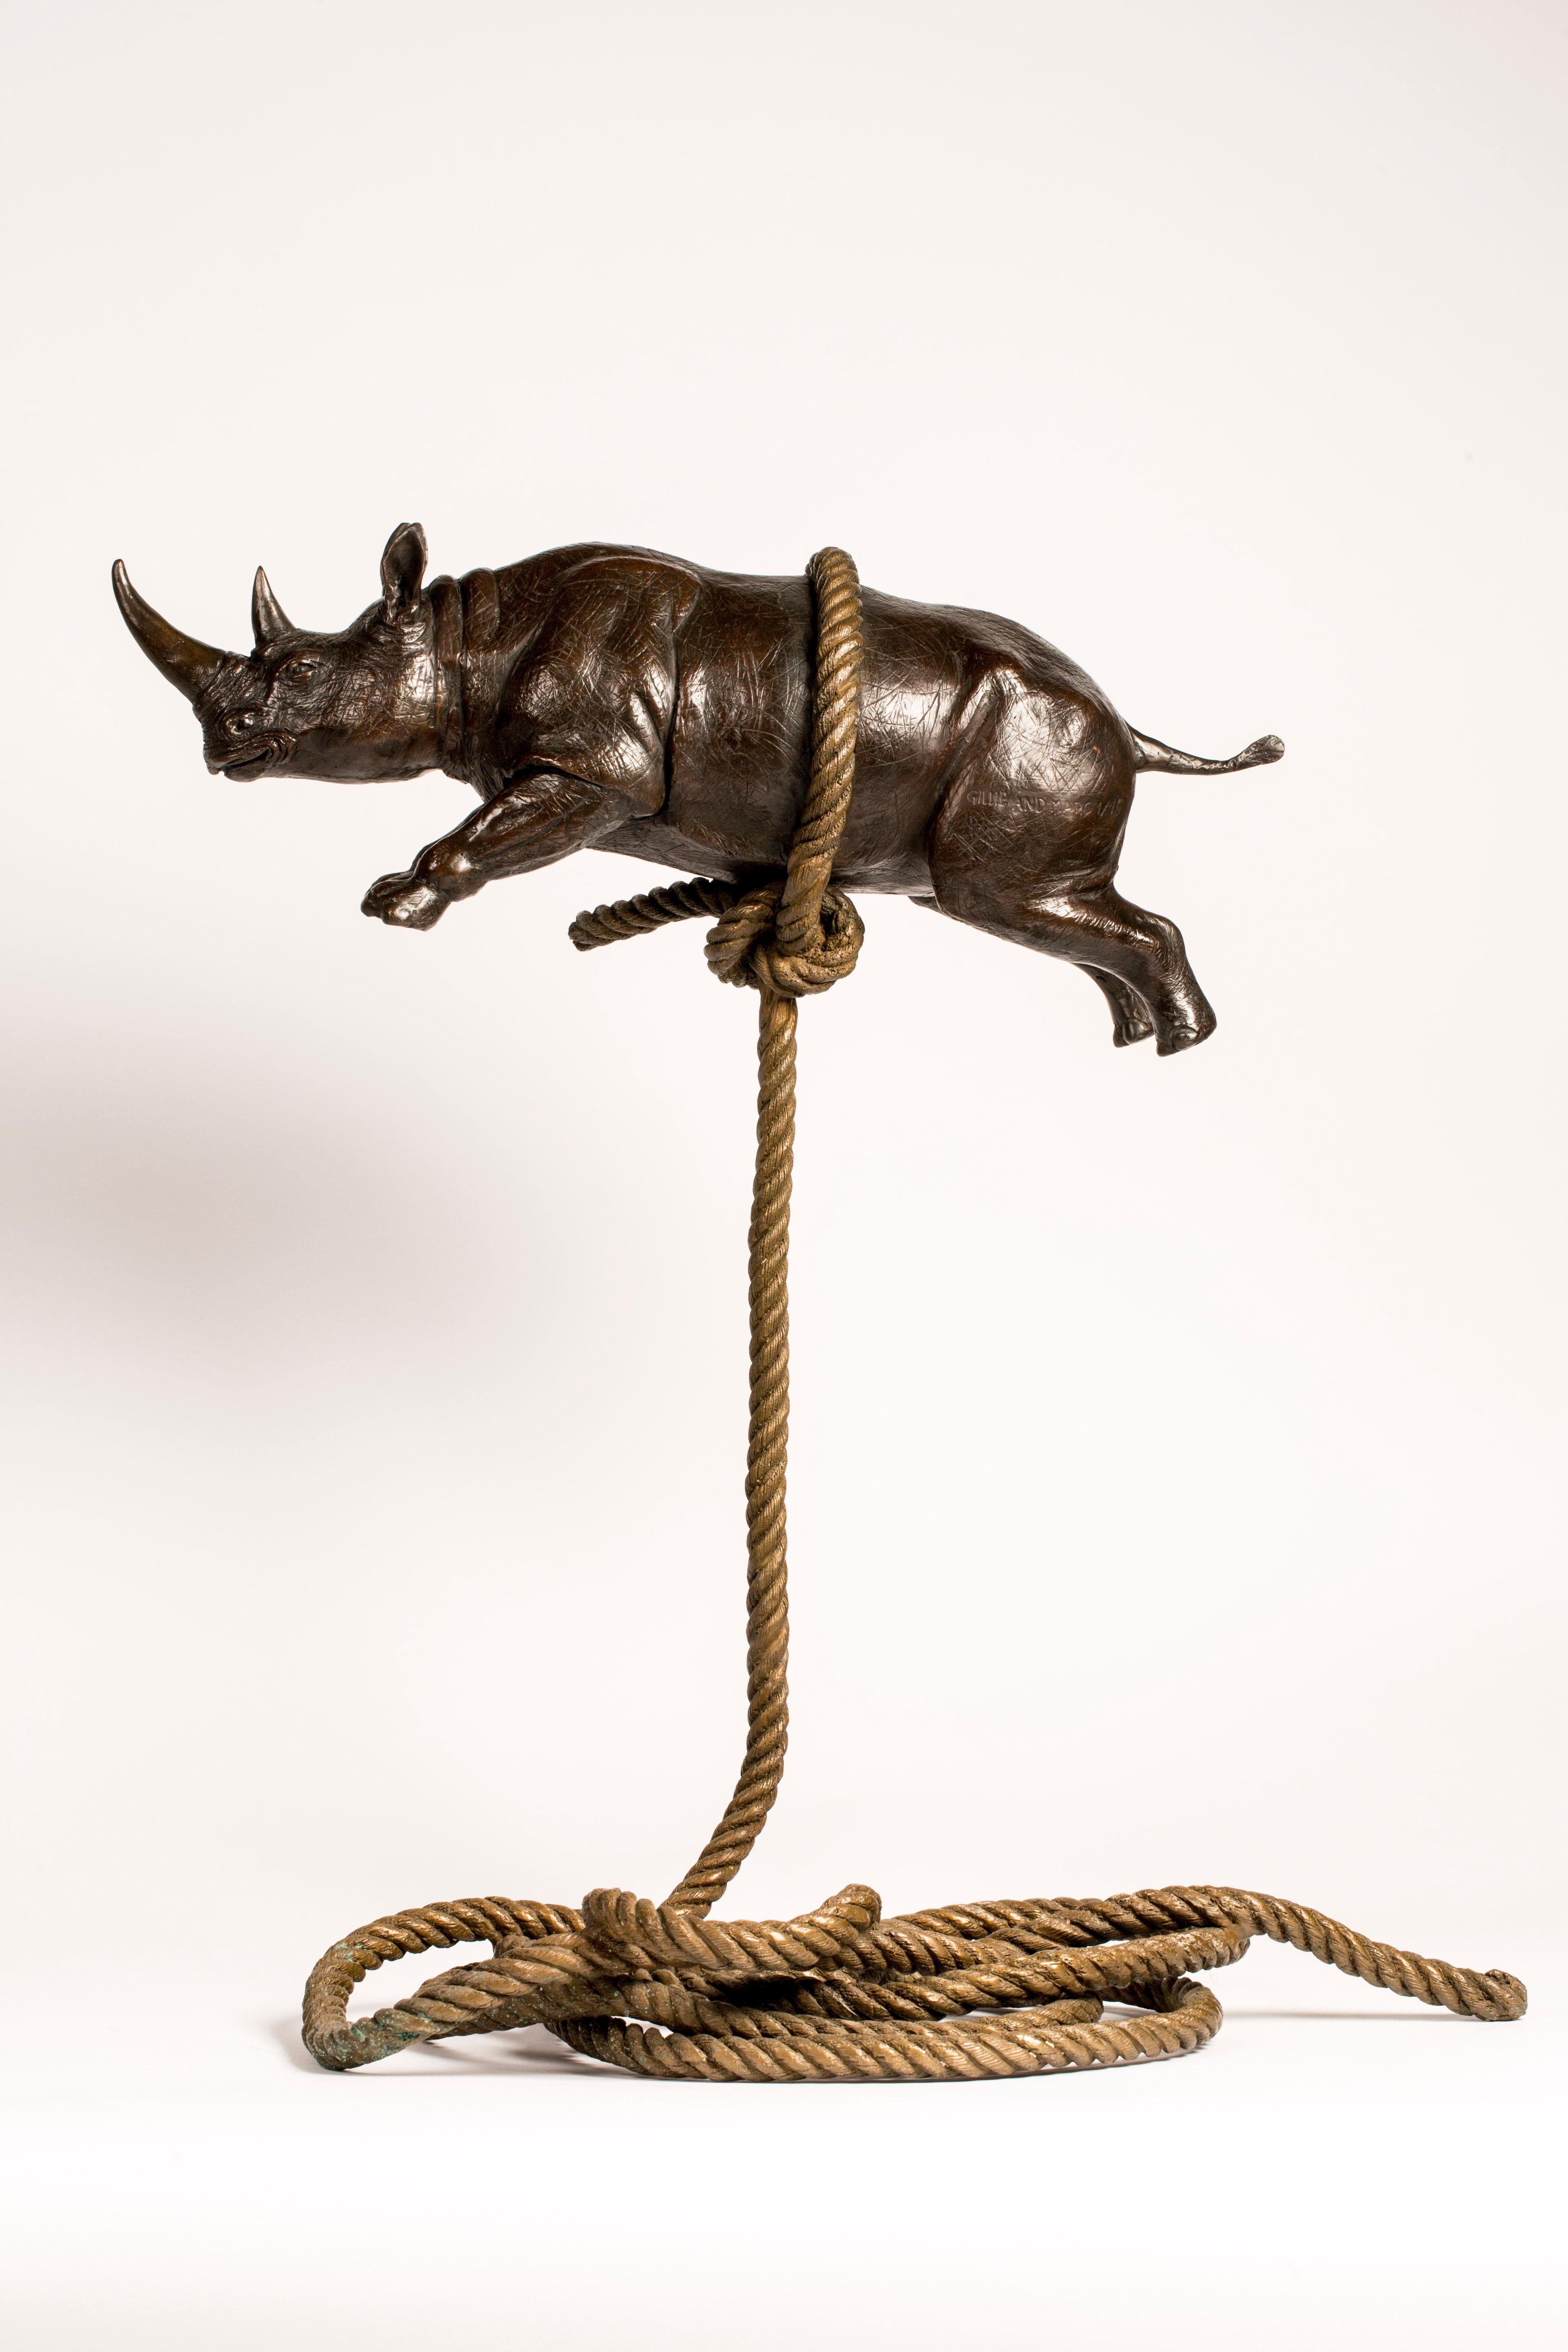 Bronze Sculpture - Limited Edition - Flying Bronze Rhino on Rope - Animal Art